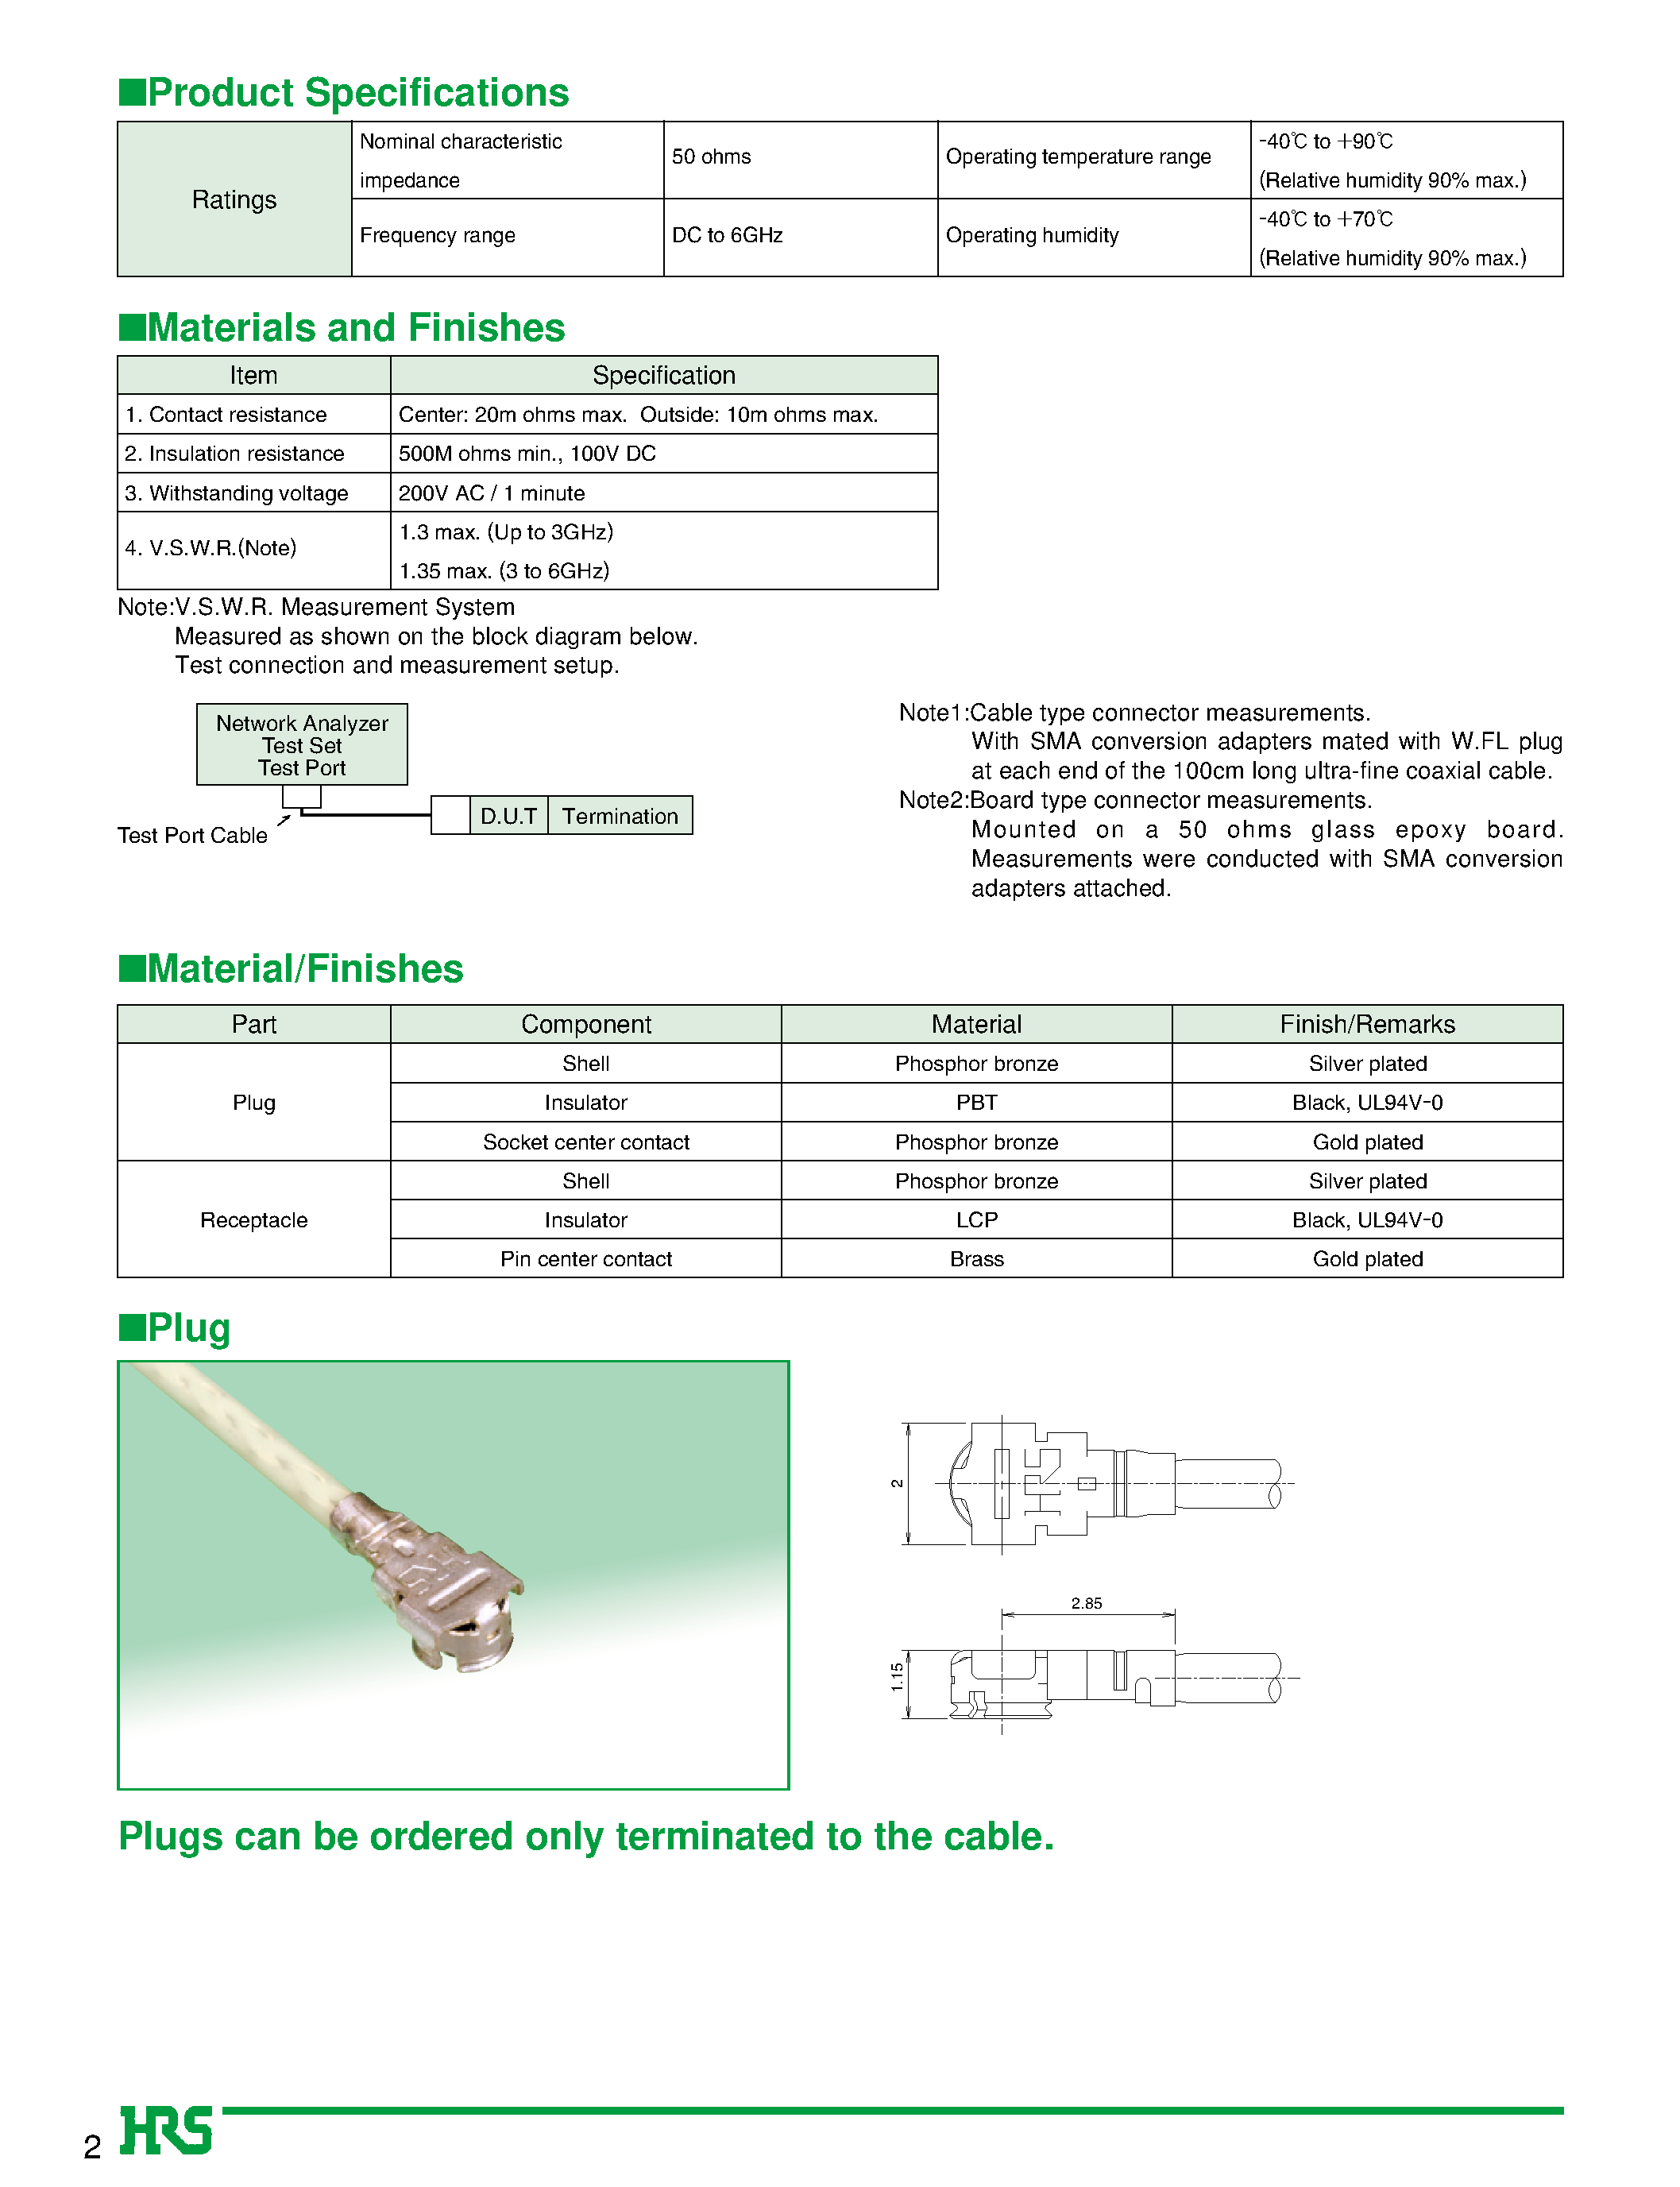 Datasheet HRMJ-W.FLP-ST1 - Ultra Small Surface Mount Coaxial Connectors - 1.4mm Mated Height page 2